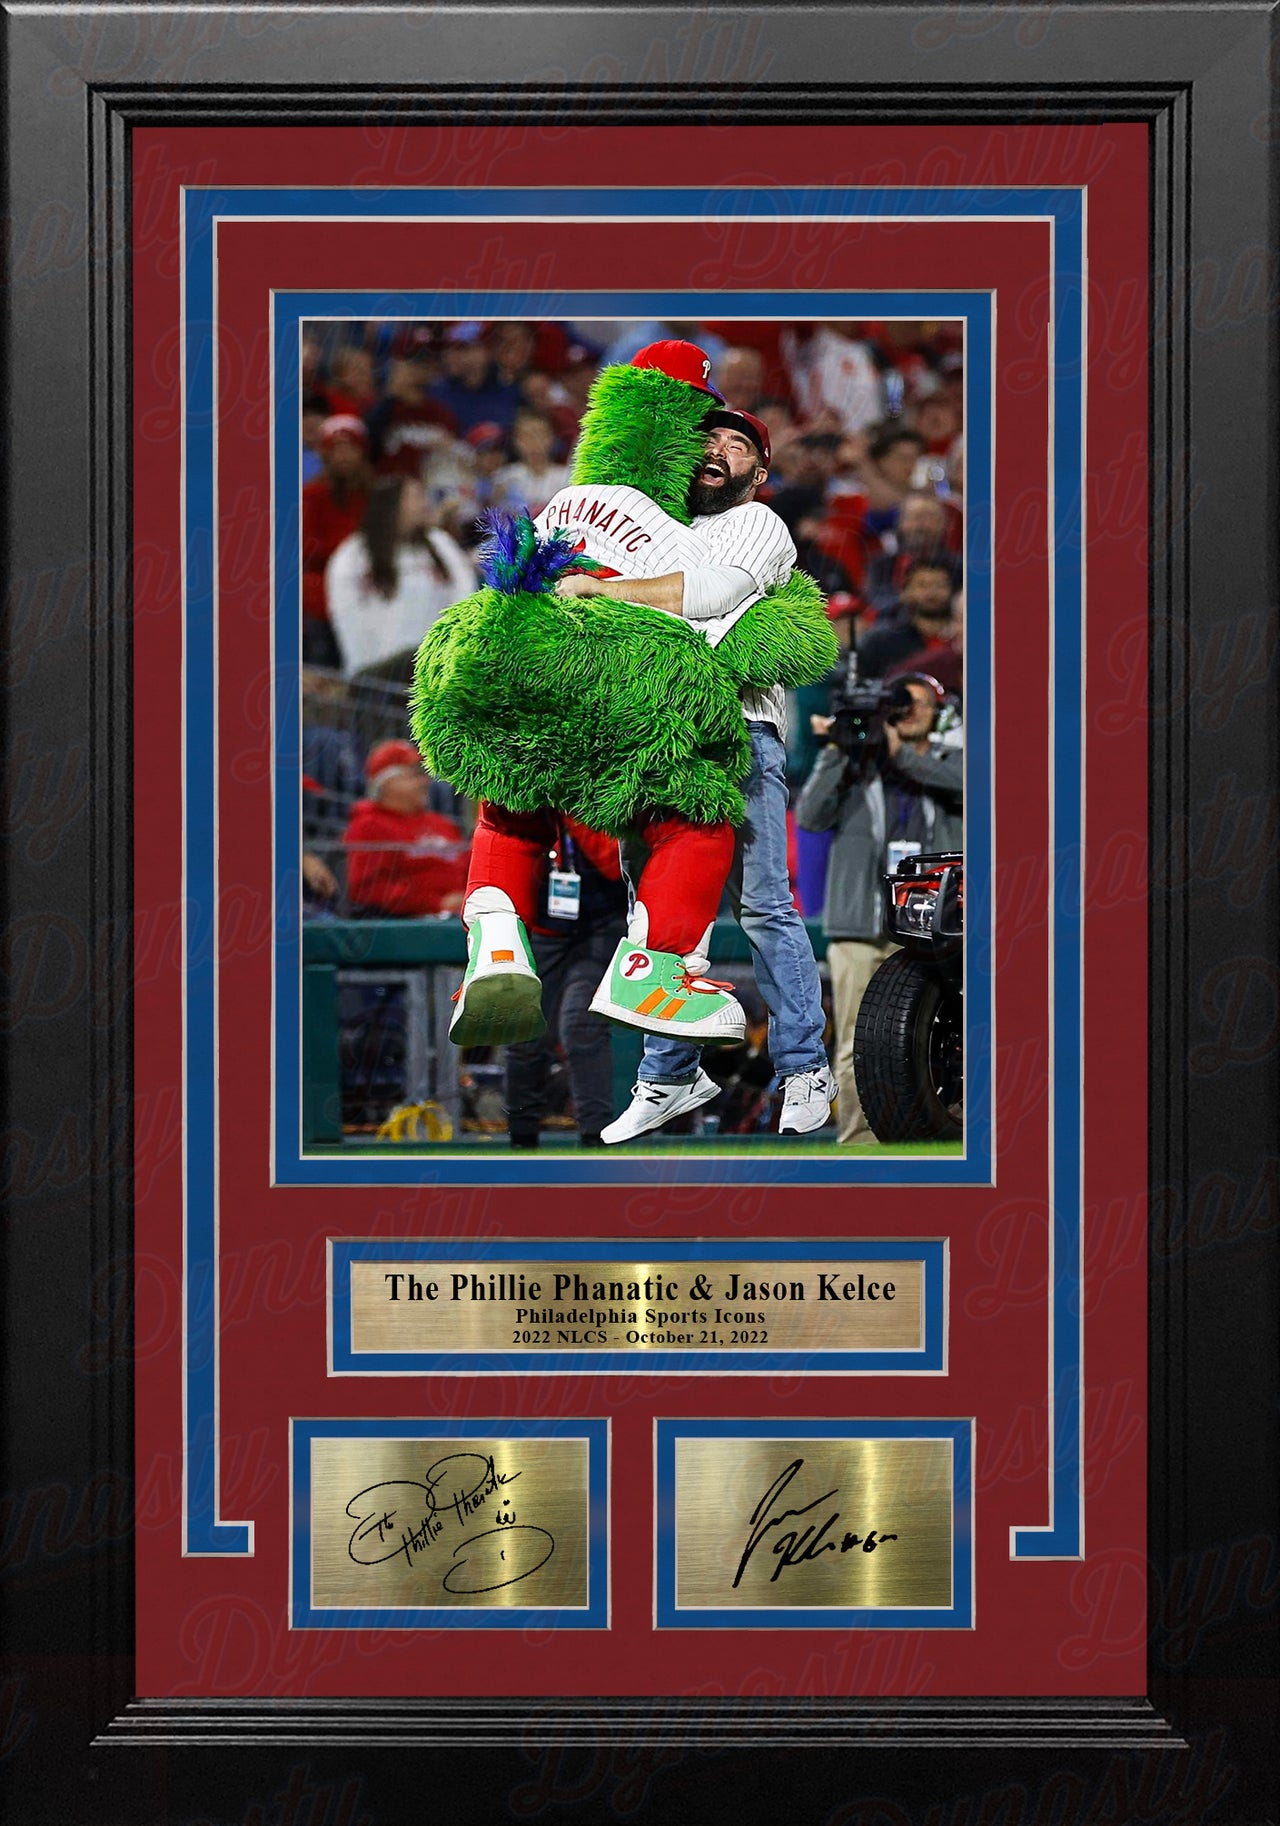 Jimmy Rollins 2008 World Series Trophy Autographed Philadelphia Phillies  11x14 Framed Photo - JSA Authenticated